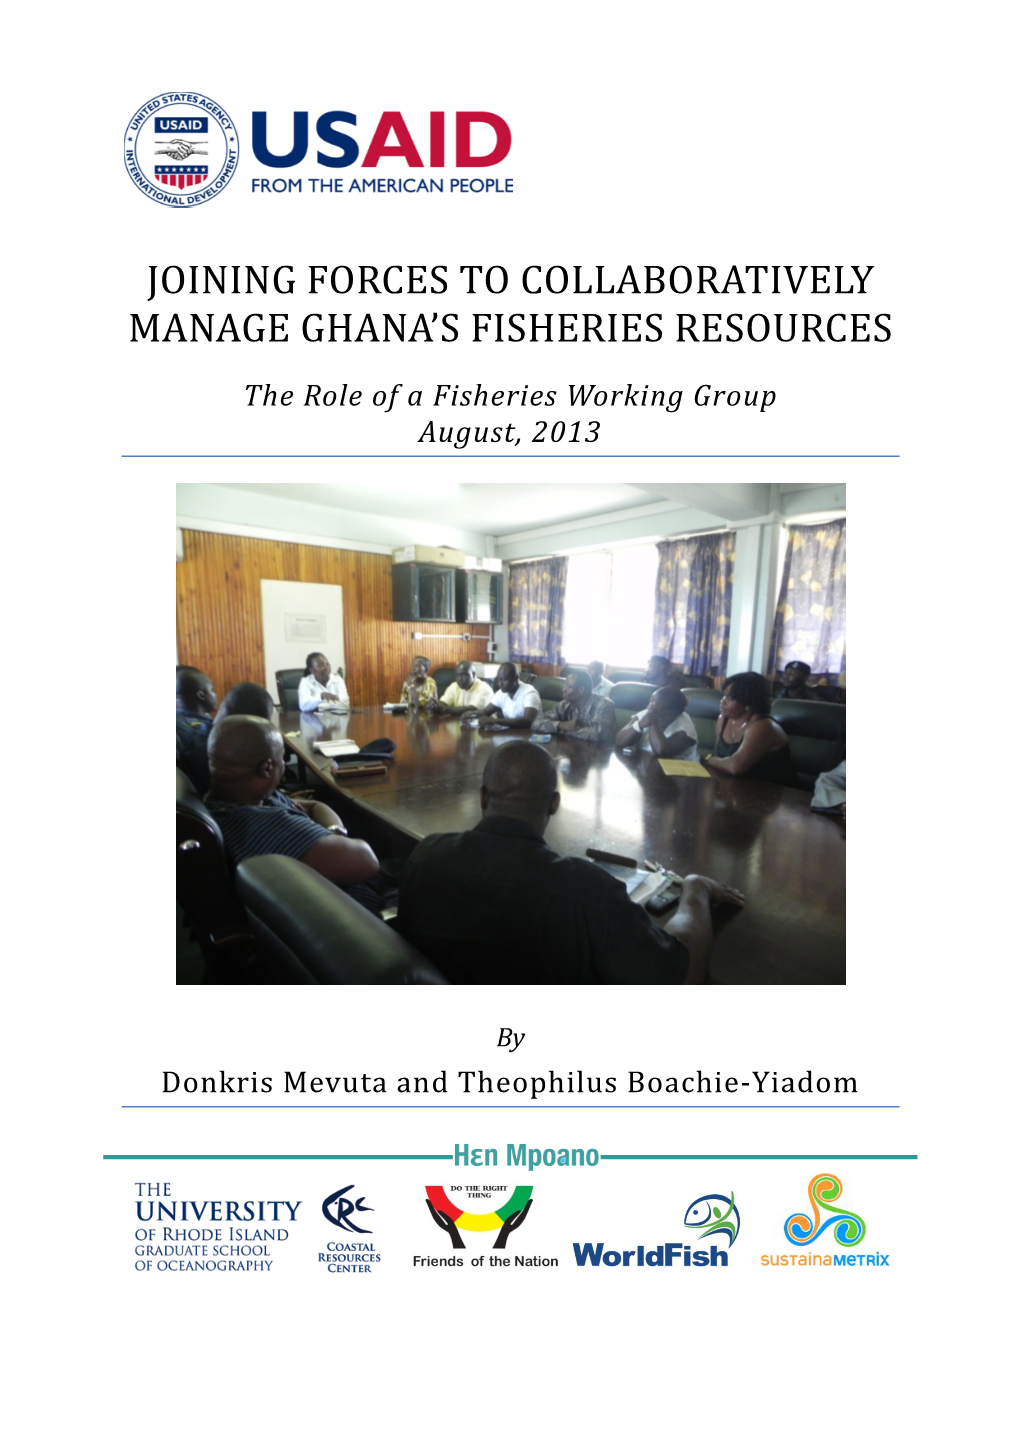 Joining Forces to Collaboratively Manage Ghana's Fisheries